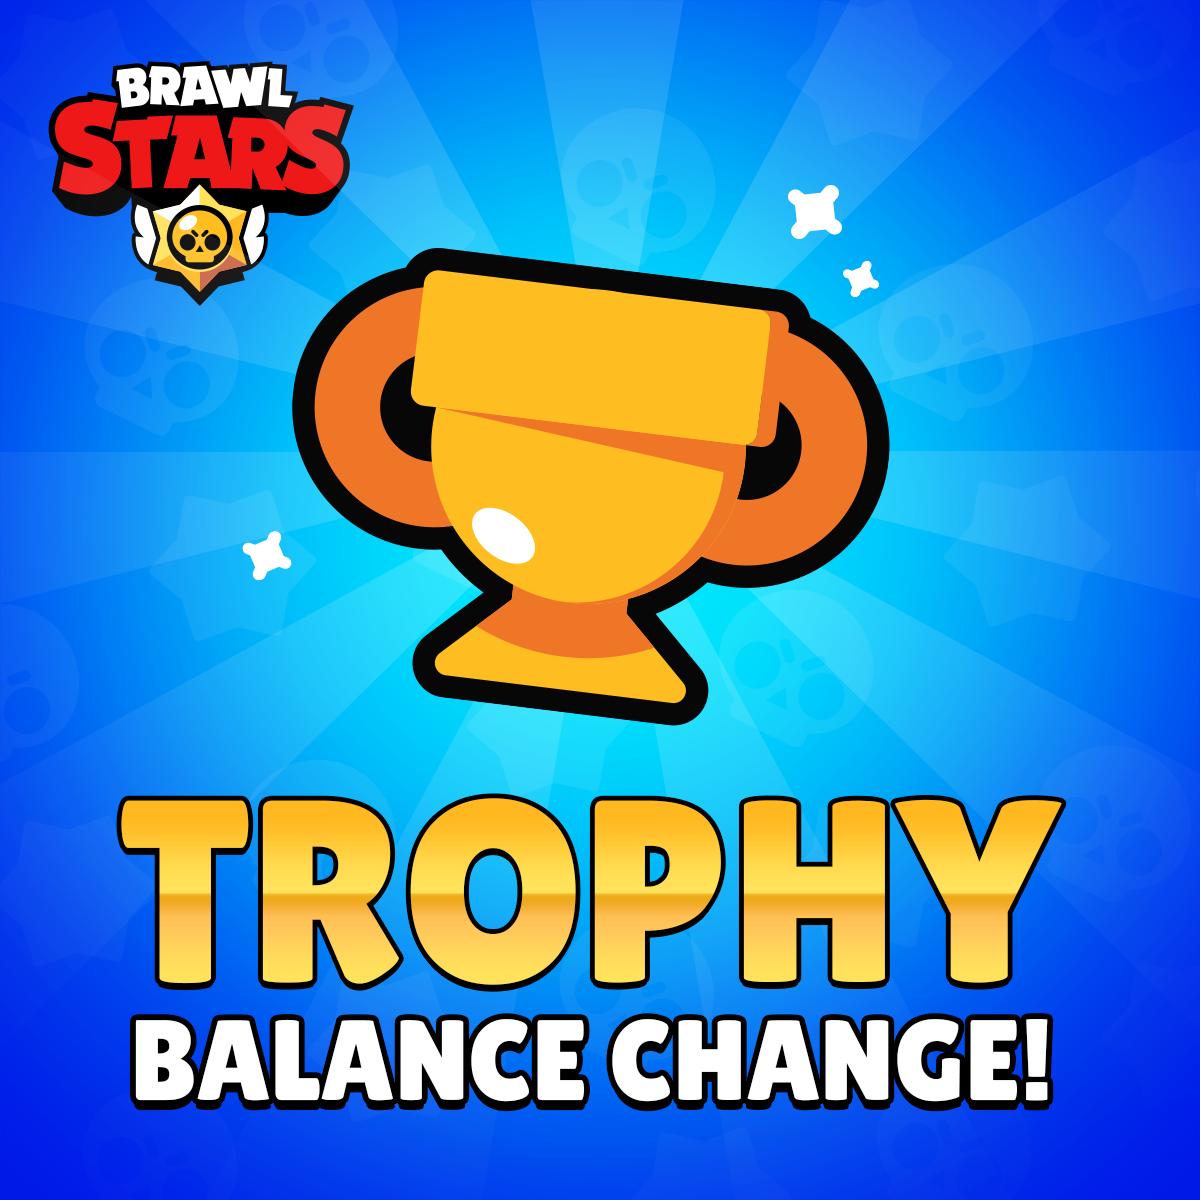 Brawl Stars On Twitter It S Now Much Faster And Easier To Gain Trophies Read All The Changes Here Https T Co Vusxleeyk8 - how to gain trophies in brawl stars